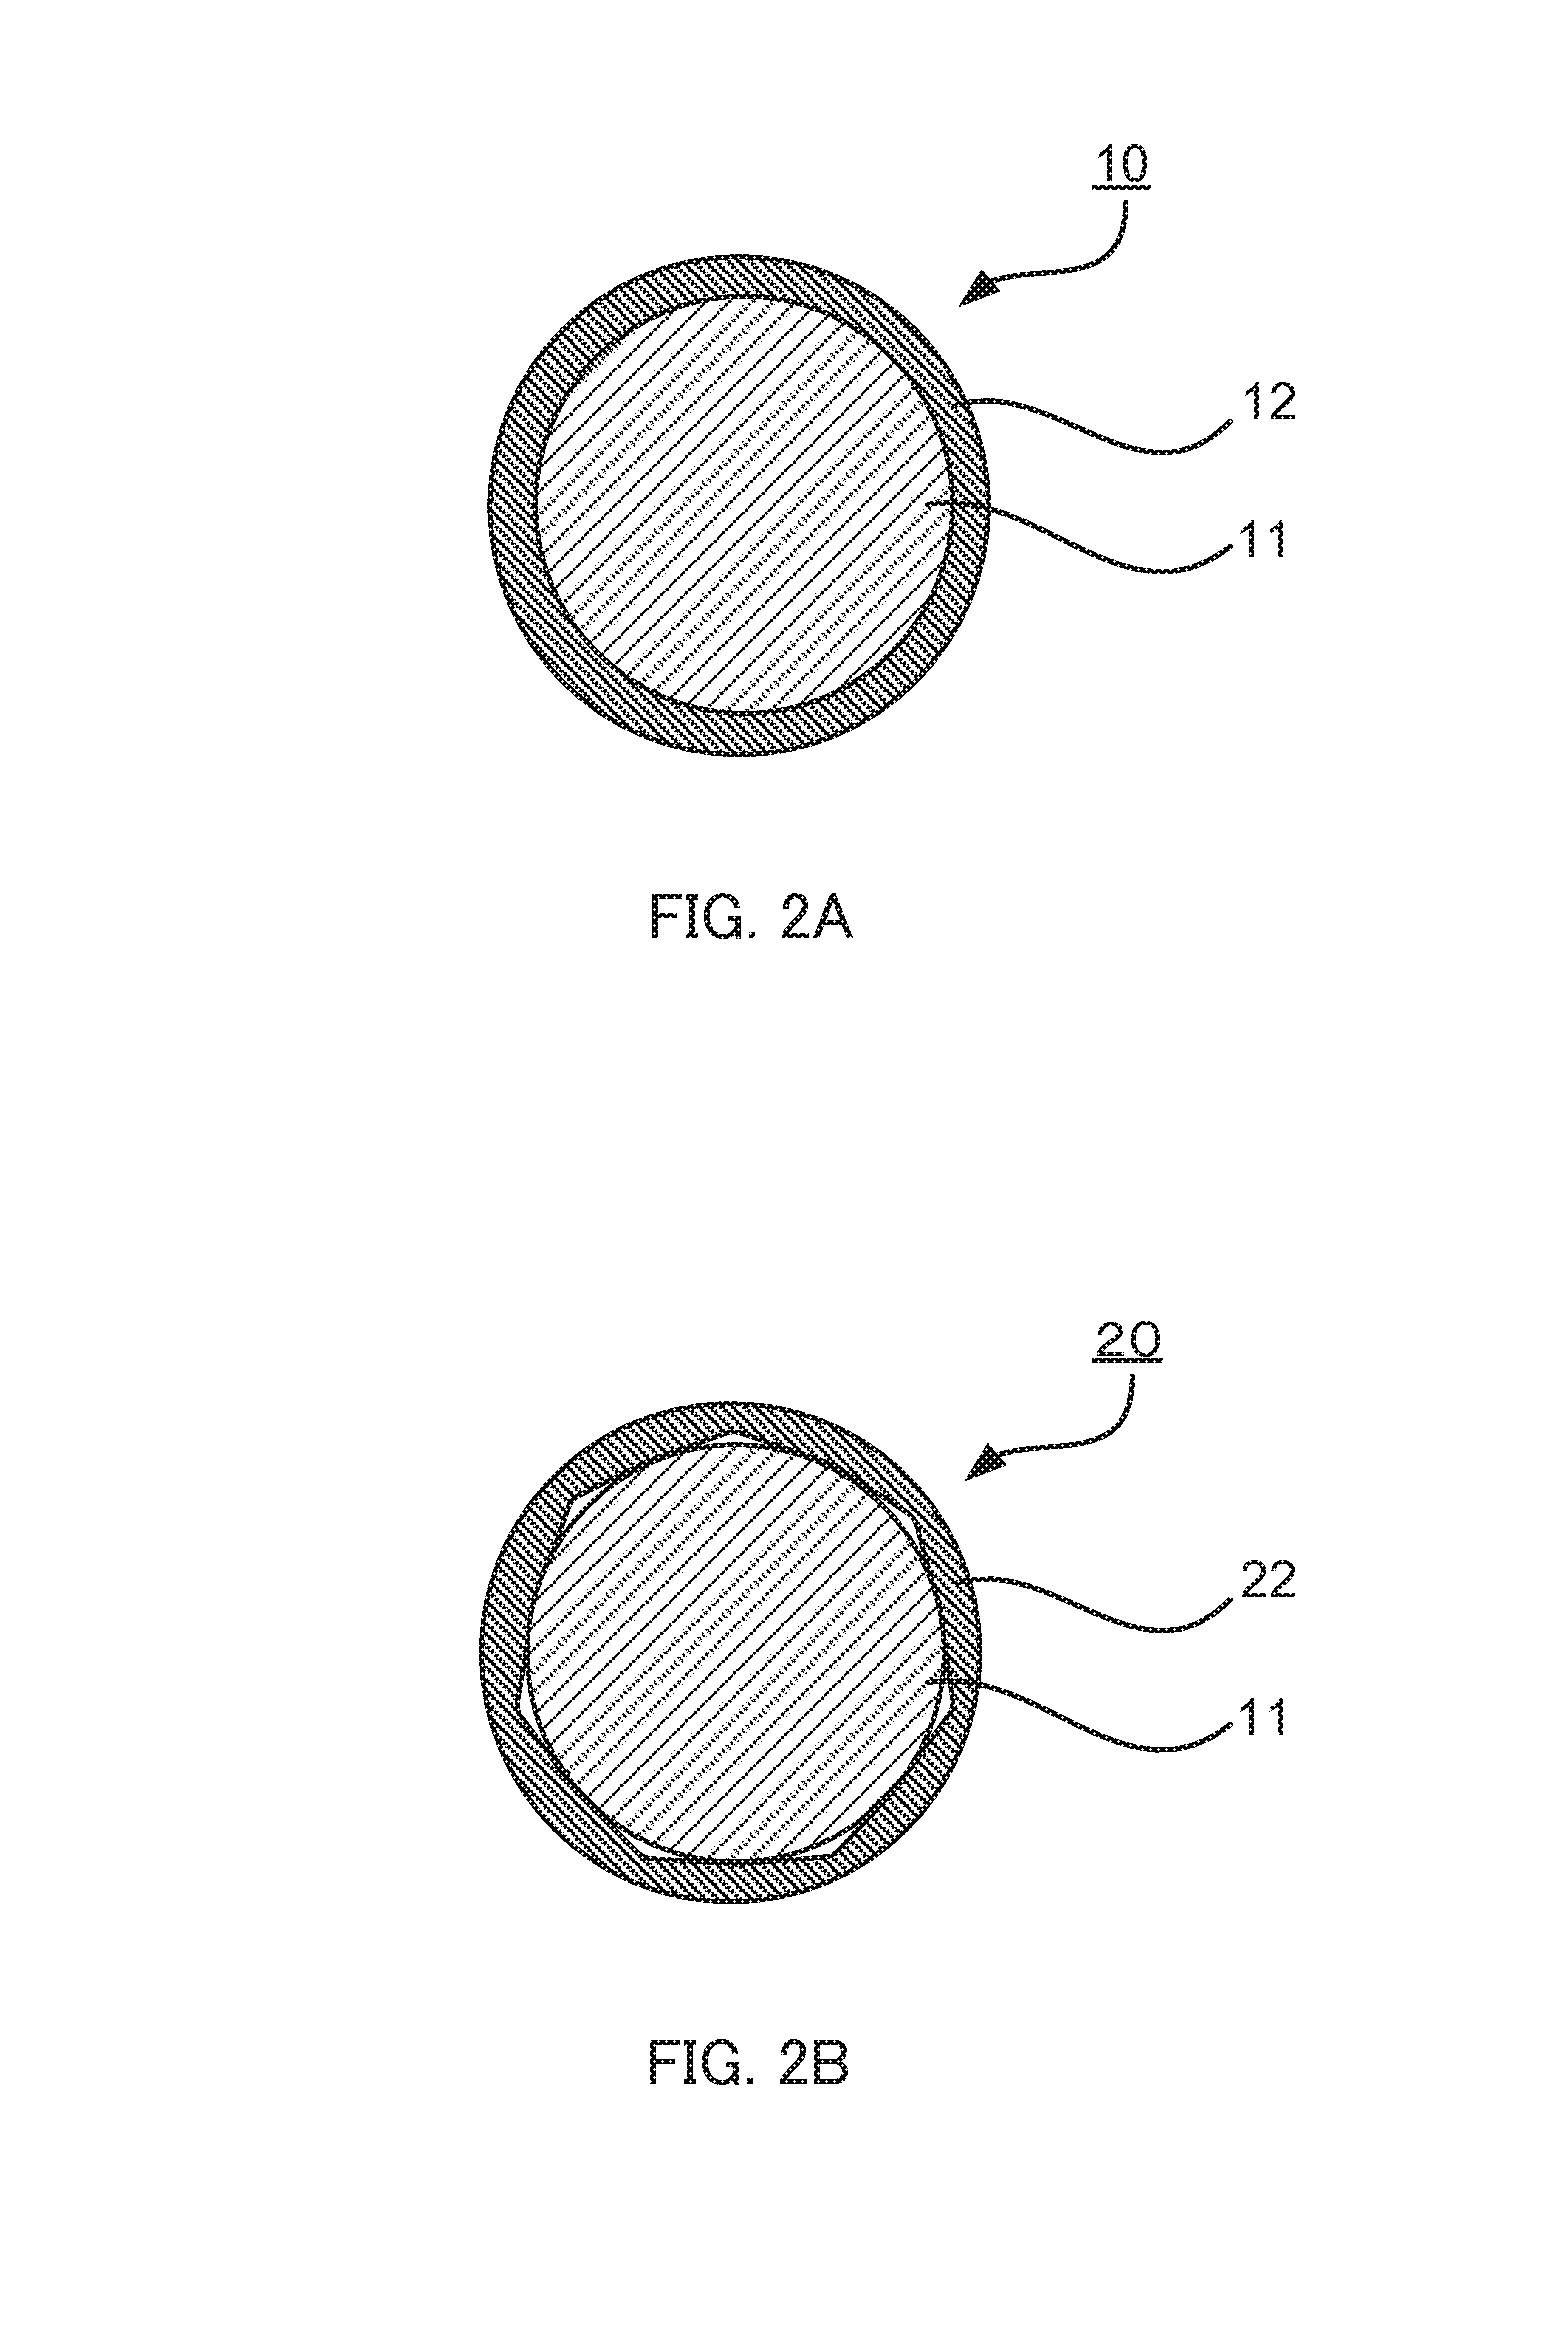 Conductive member, image forming apparatus, conductive particle and method for manufacturing the same